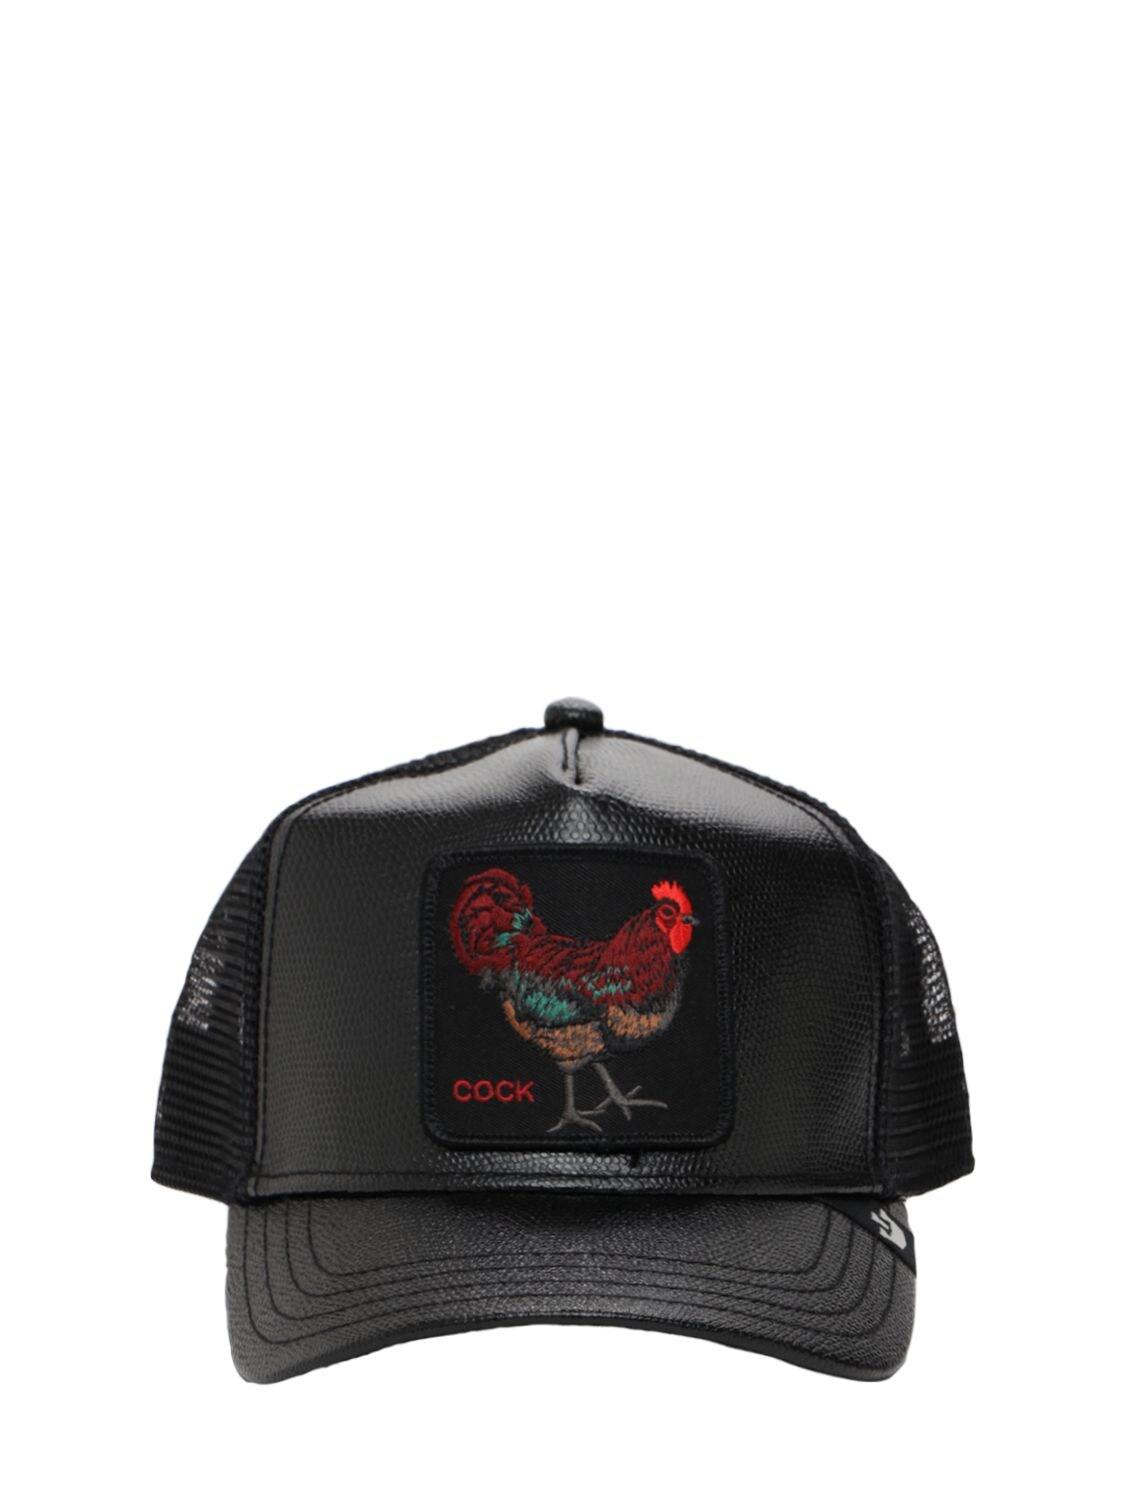 Goorin Bros Cock Patch Faux Leather Trucker Cap in Black for Men - Lyst